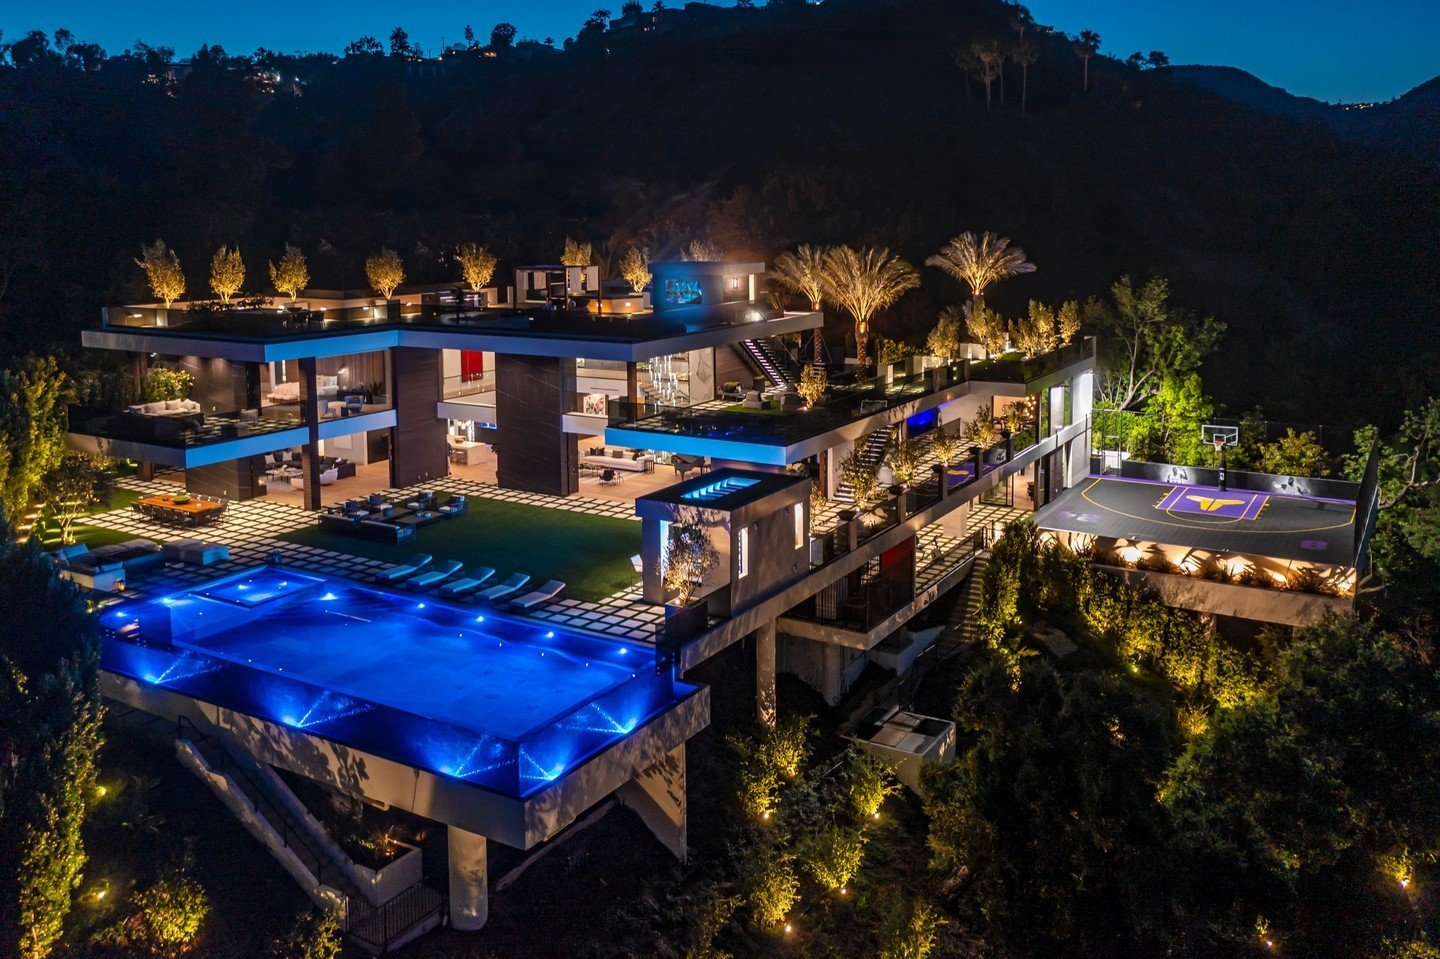 Bundy Drive in Brentwood, Los Angeles, designed for the luxury entertainment and sports lifestyle. Photo by @berlynmedia